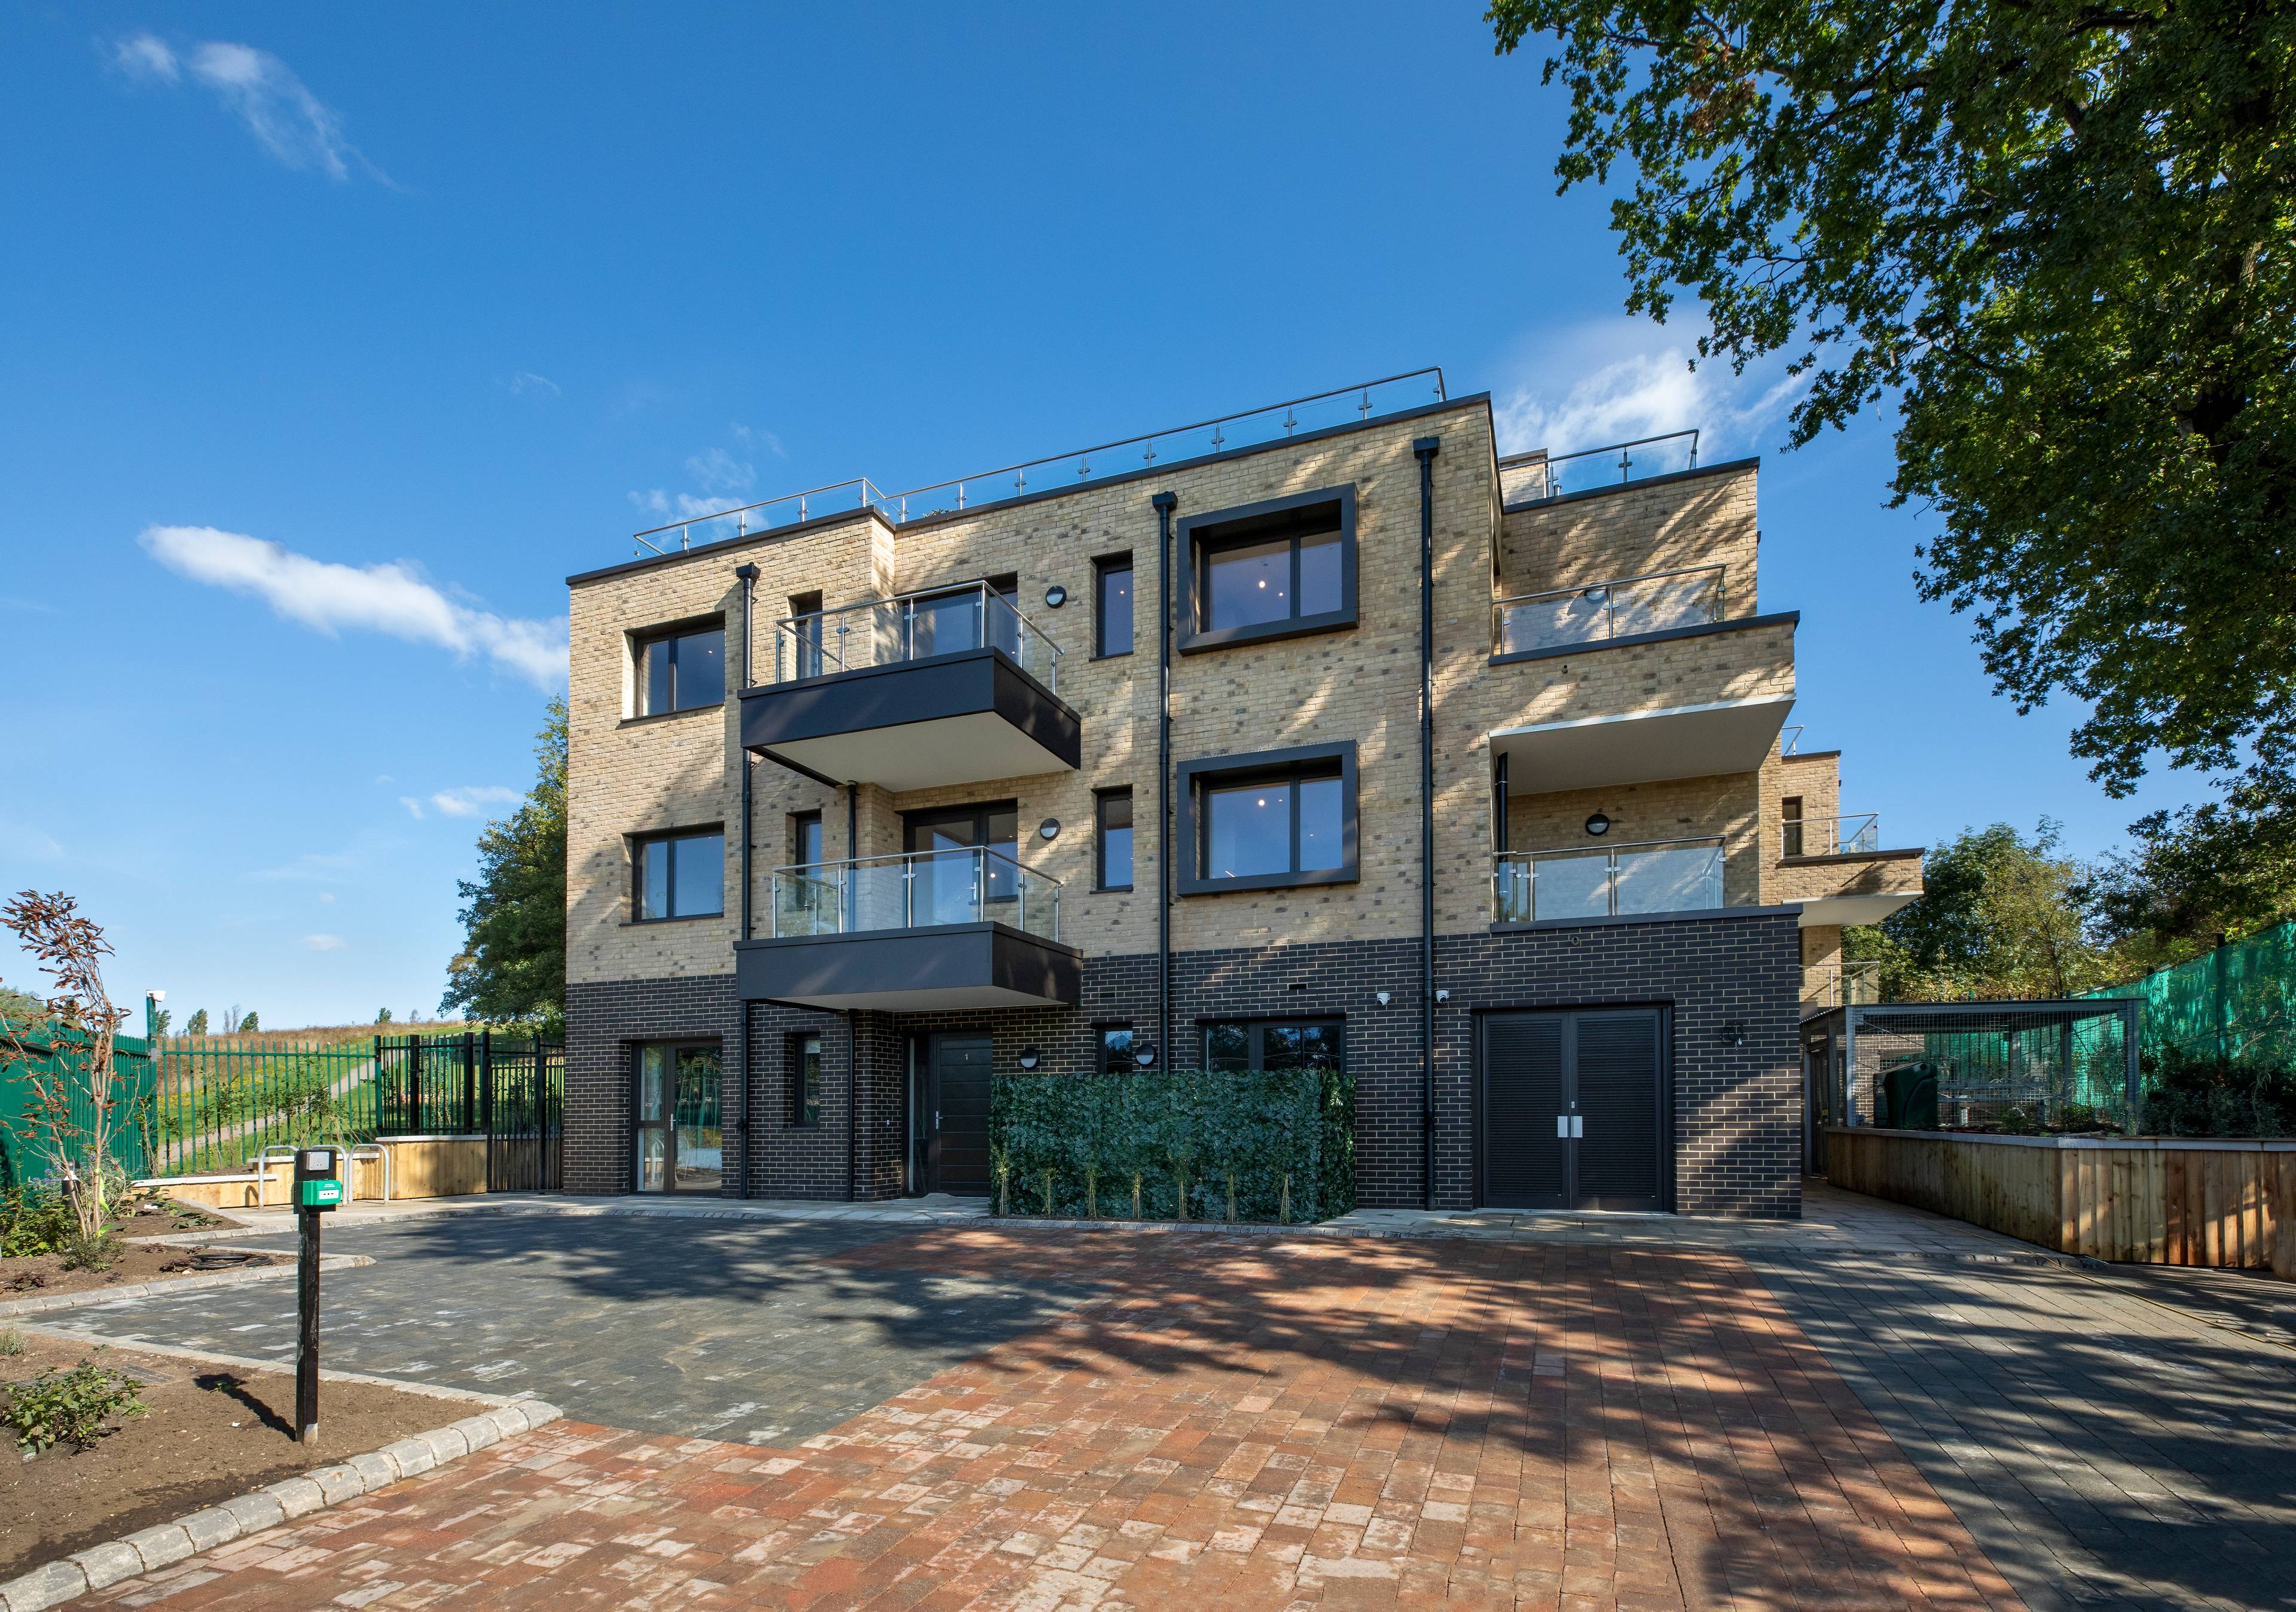 New Development Of Just 12 Luxury Apartments Located On The Periphery Of One Tree Hill, Wembley